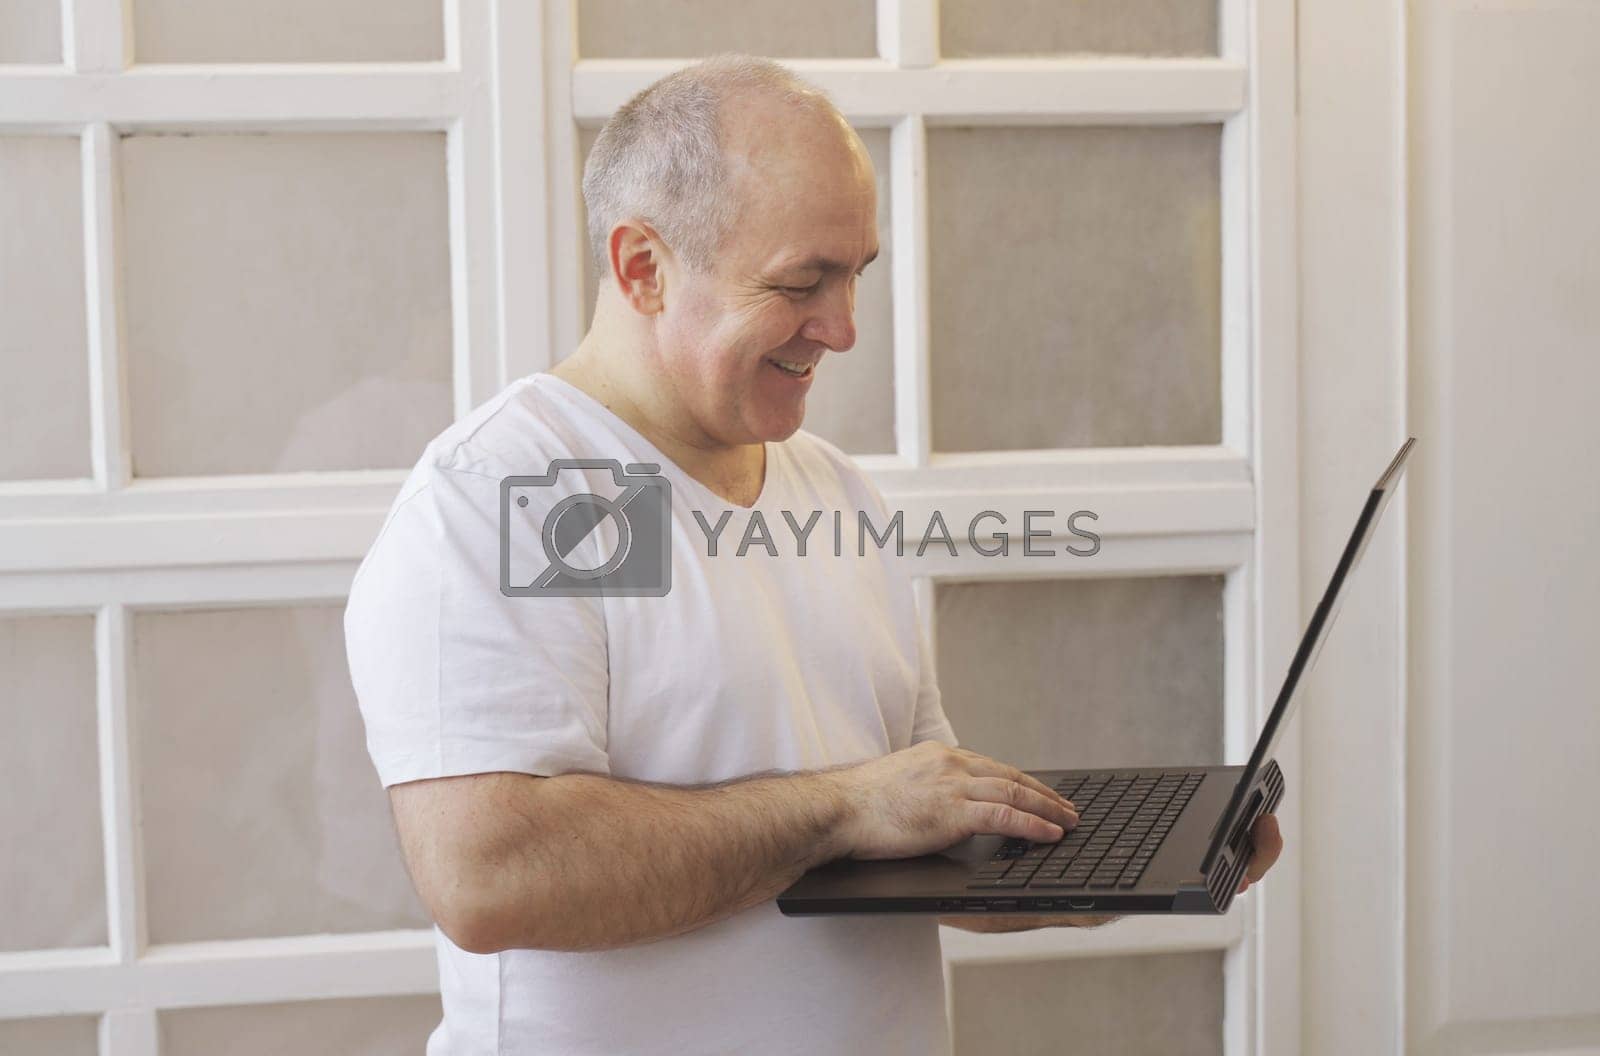 Royalty free image of A man with a laptop in his hands has a lively conversation on a video call by Sd28DimoN_1976